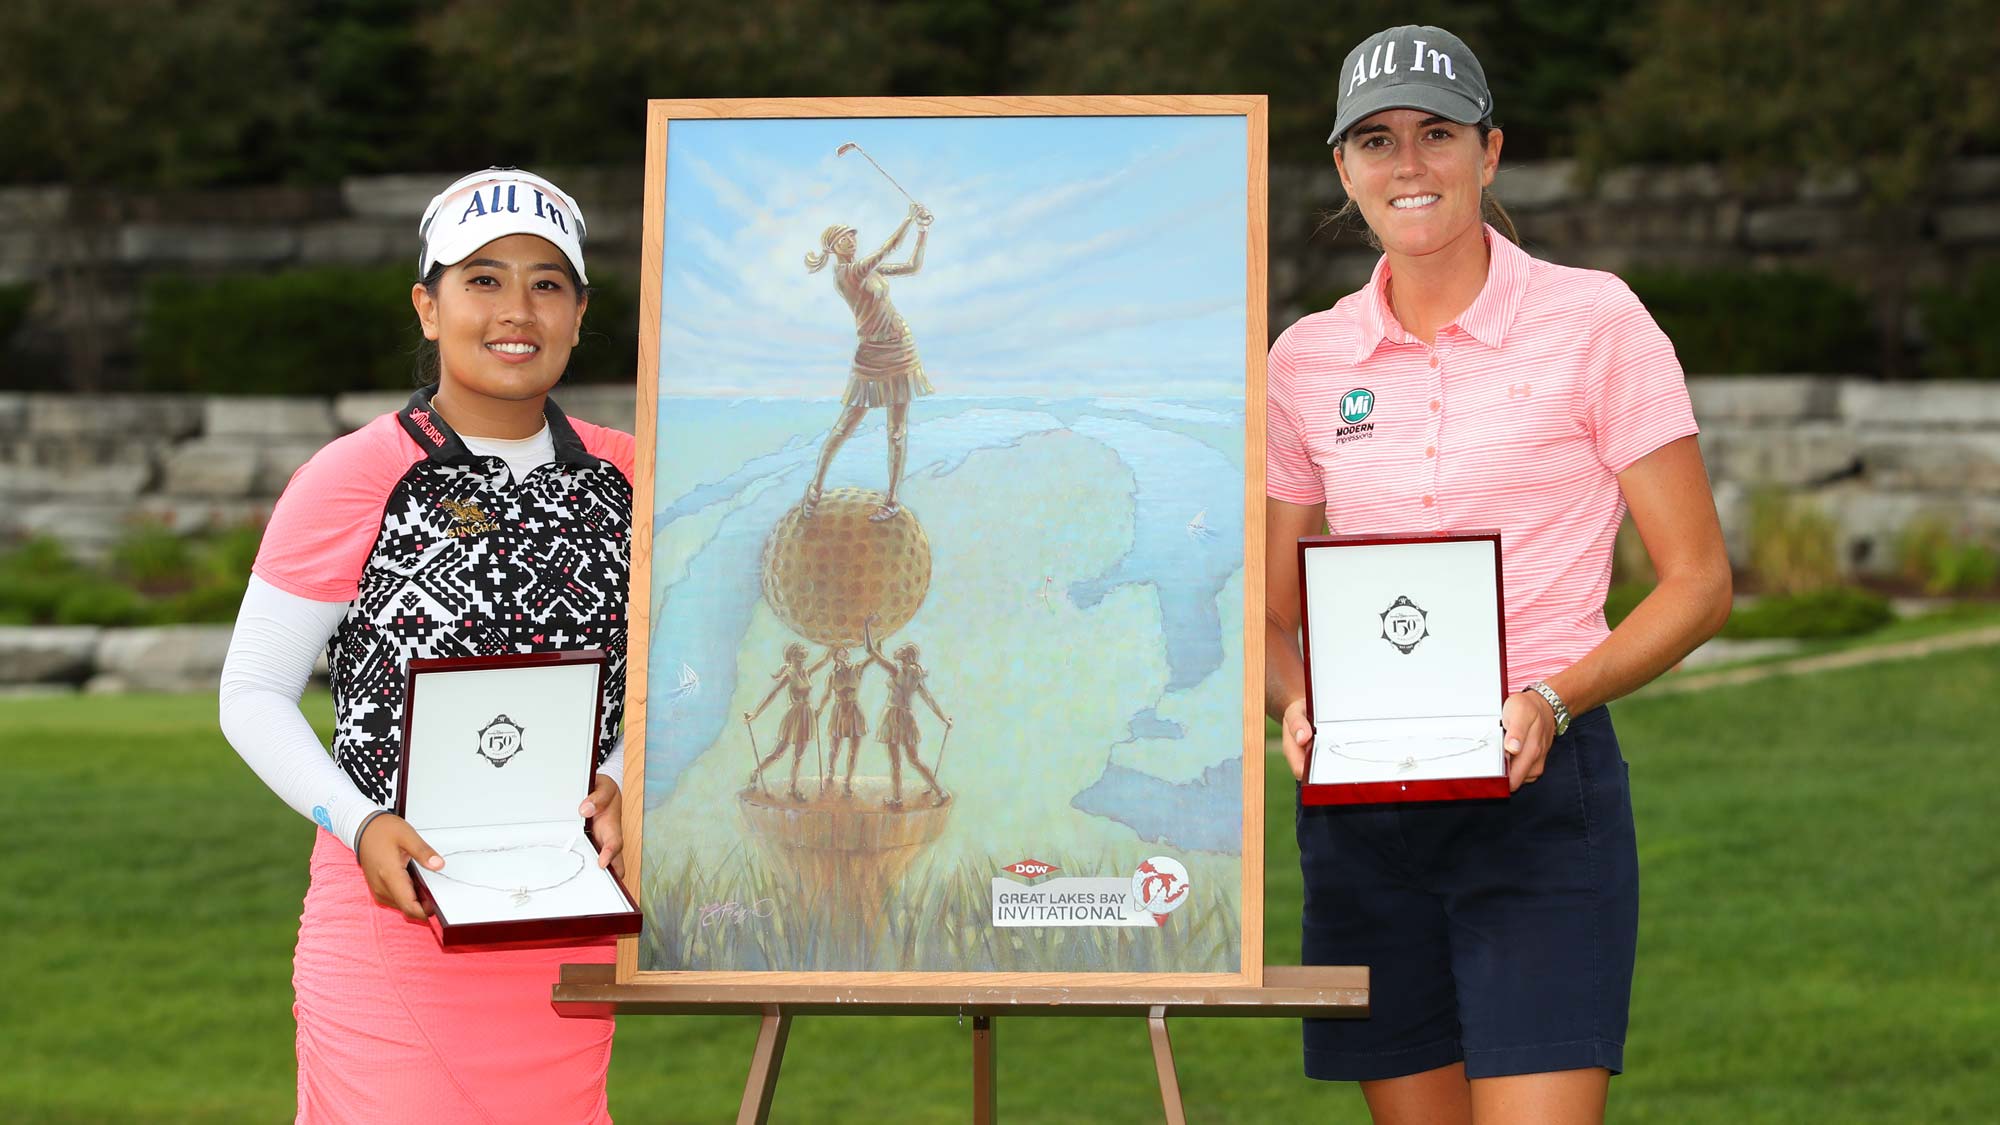 Jasmine Suwannapura and Cydney Clanton have their #BagsPacked for the 2020 Diamond Resorts Tournament of Champions after their win at the Dow Great Lakes Bay invitational